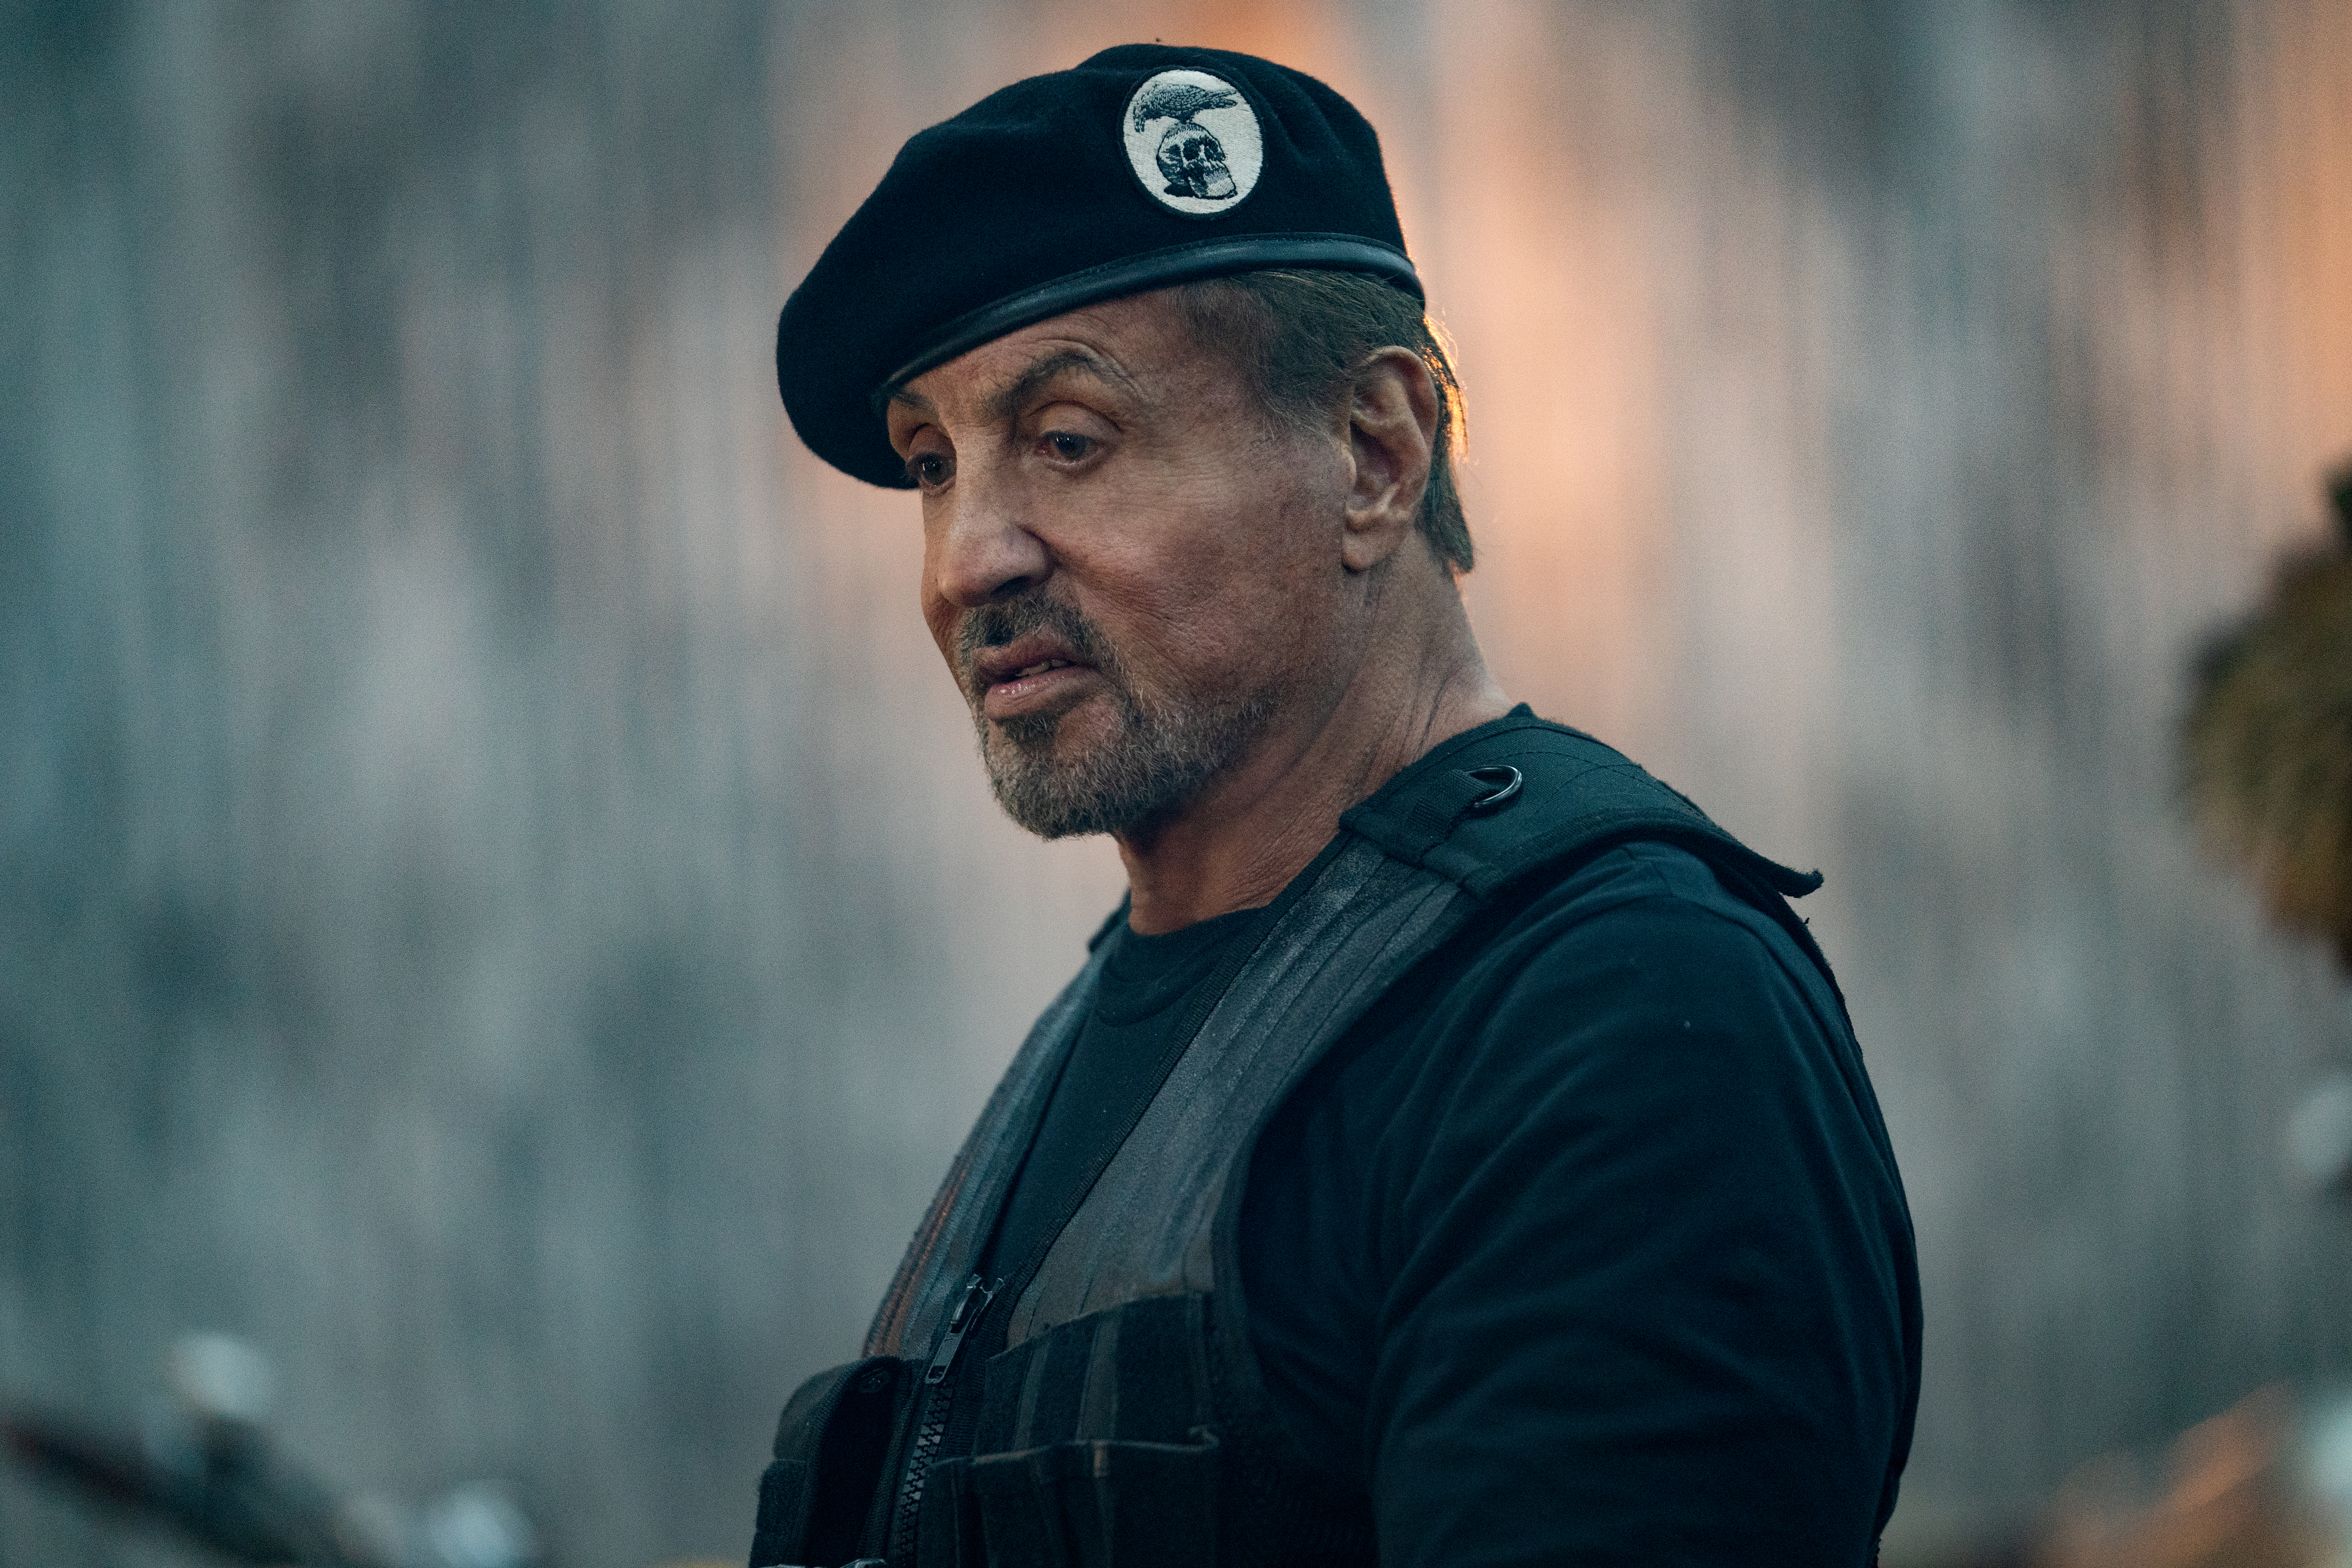 A midshot of Sylvester Stallone wearing a black beret and vest in the film Expend4bles.